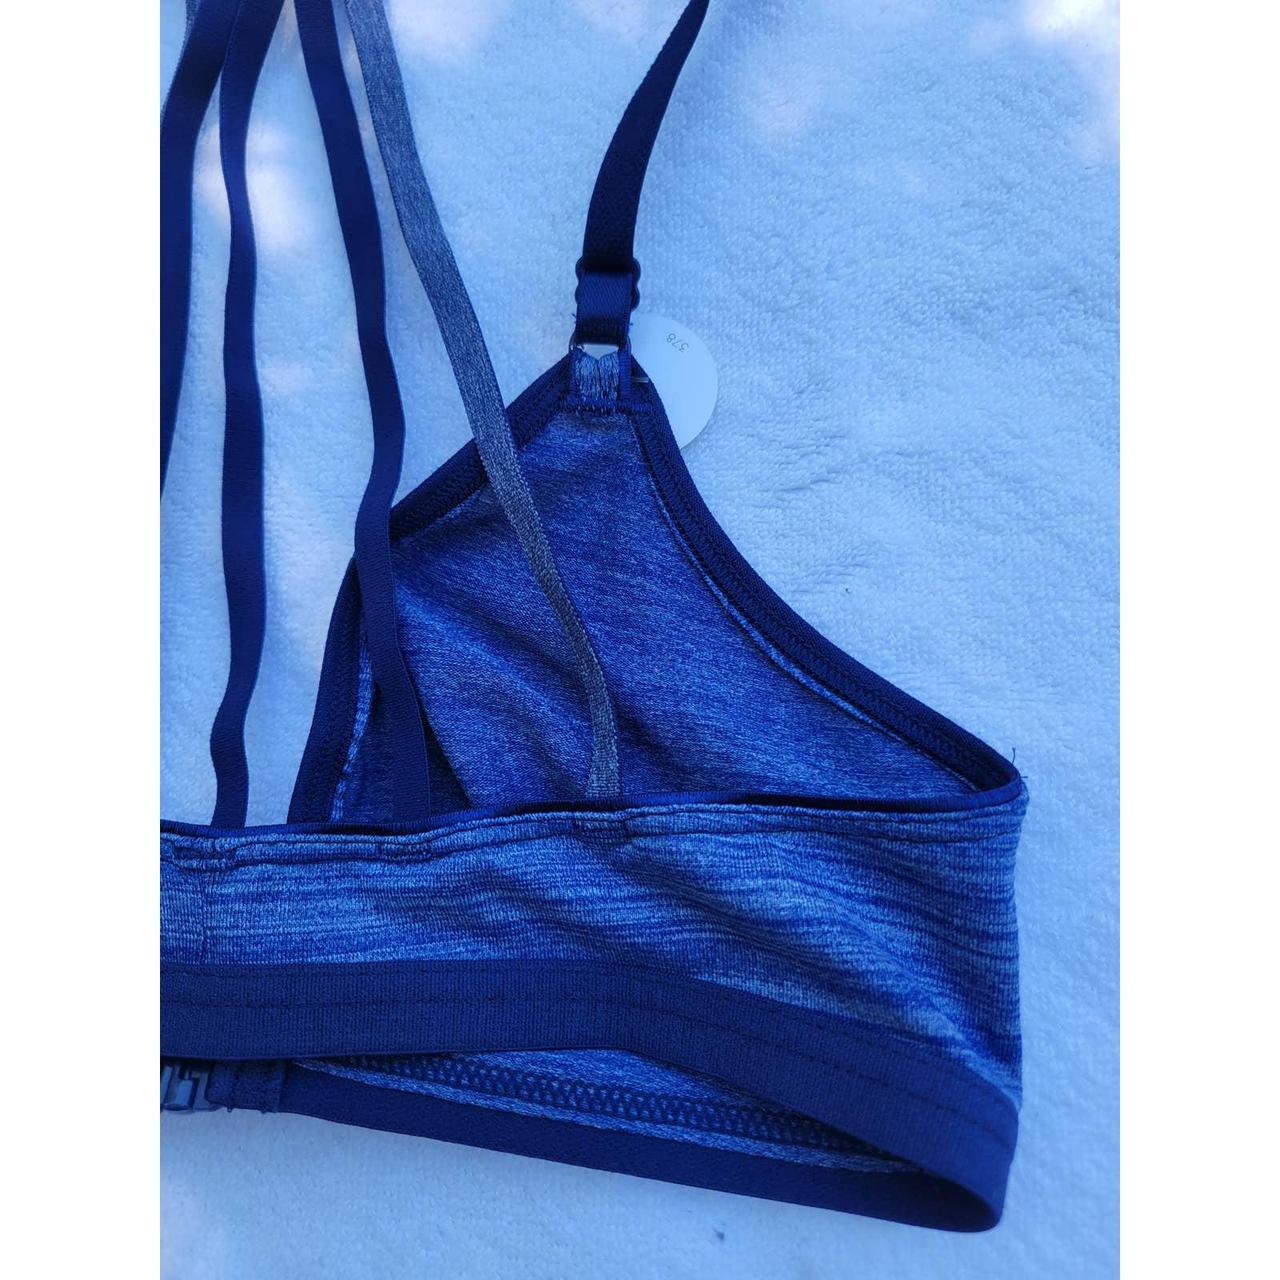 Product Image 4 - B. Tempt’d bralette
Size Small
Blue 
New